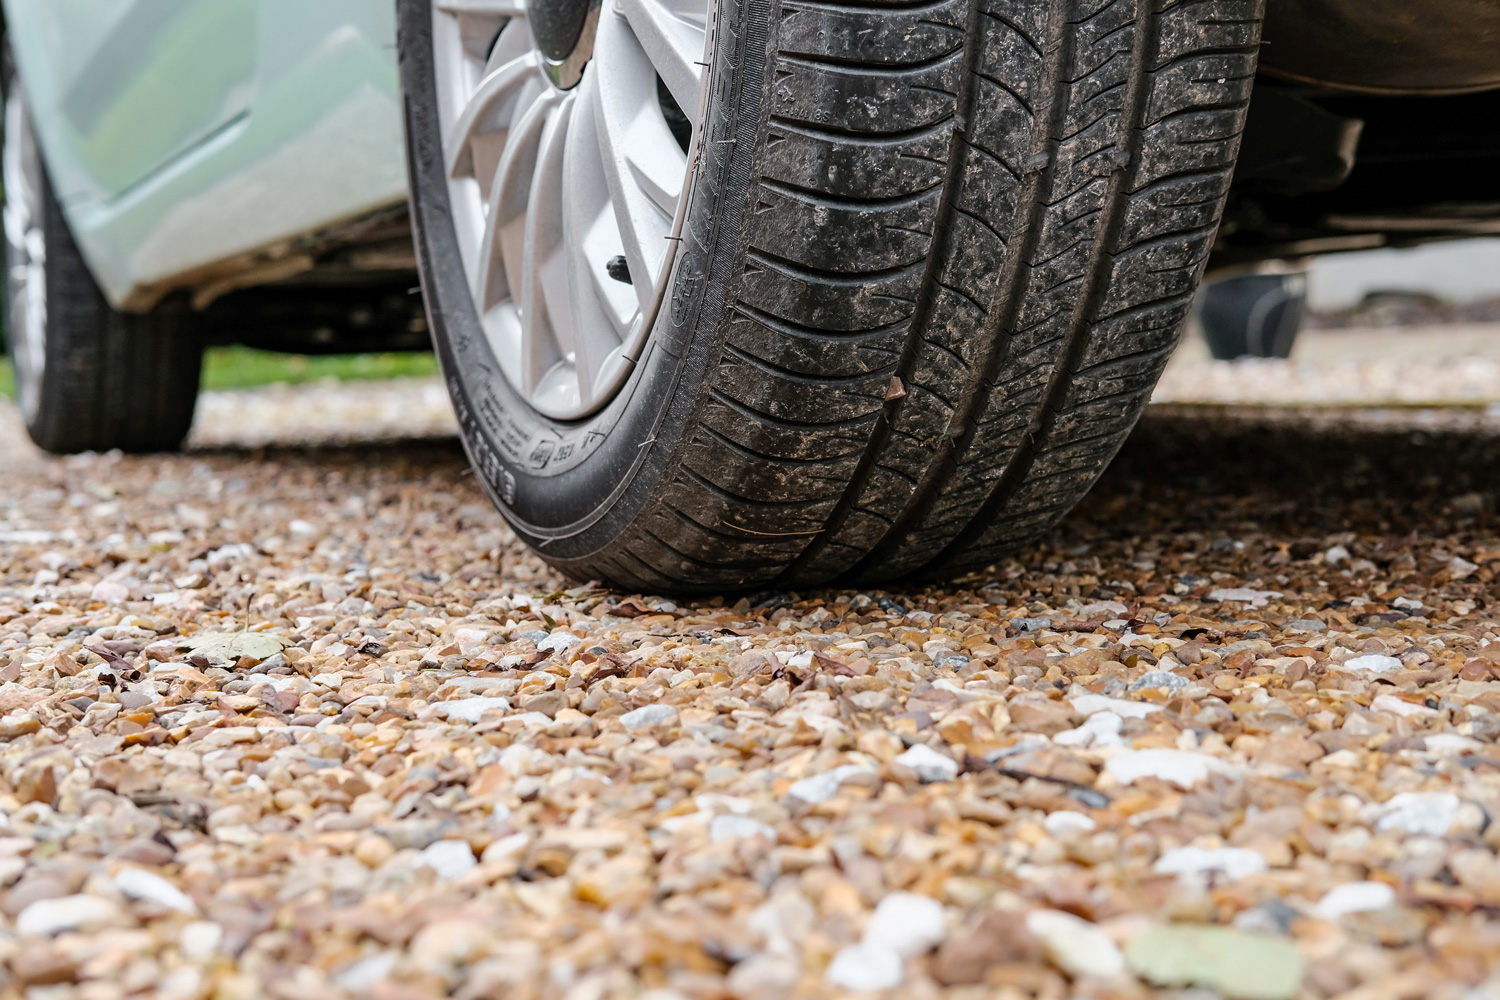 Ground level view of a new car, showing the rear tyre and tread together with the alloy wheel. 